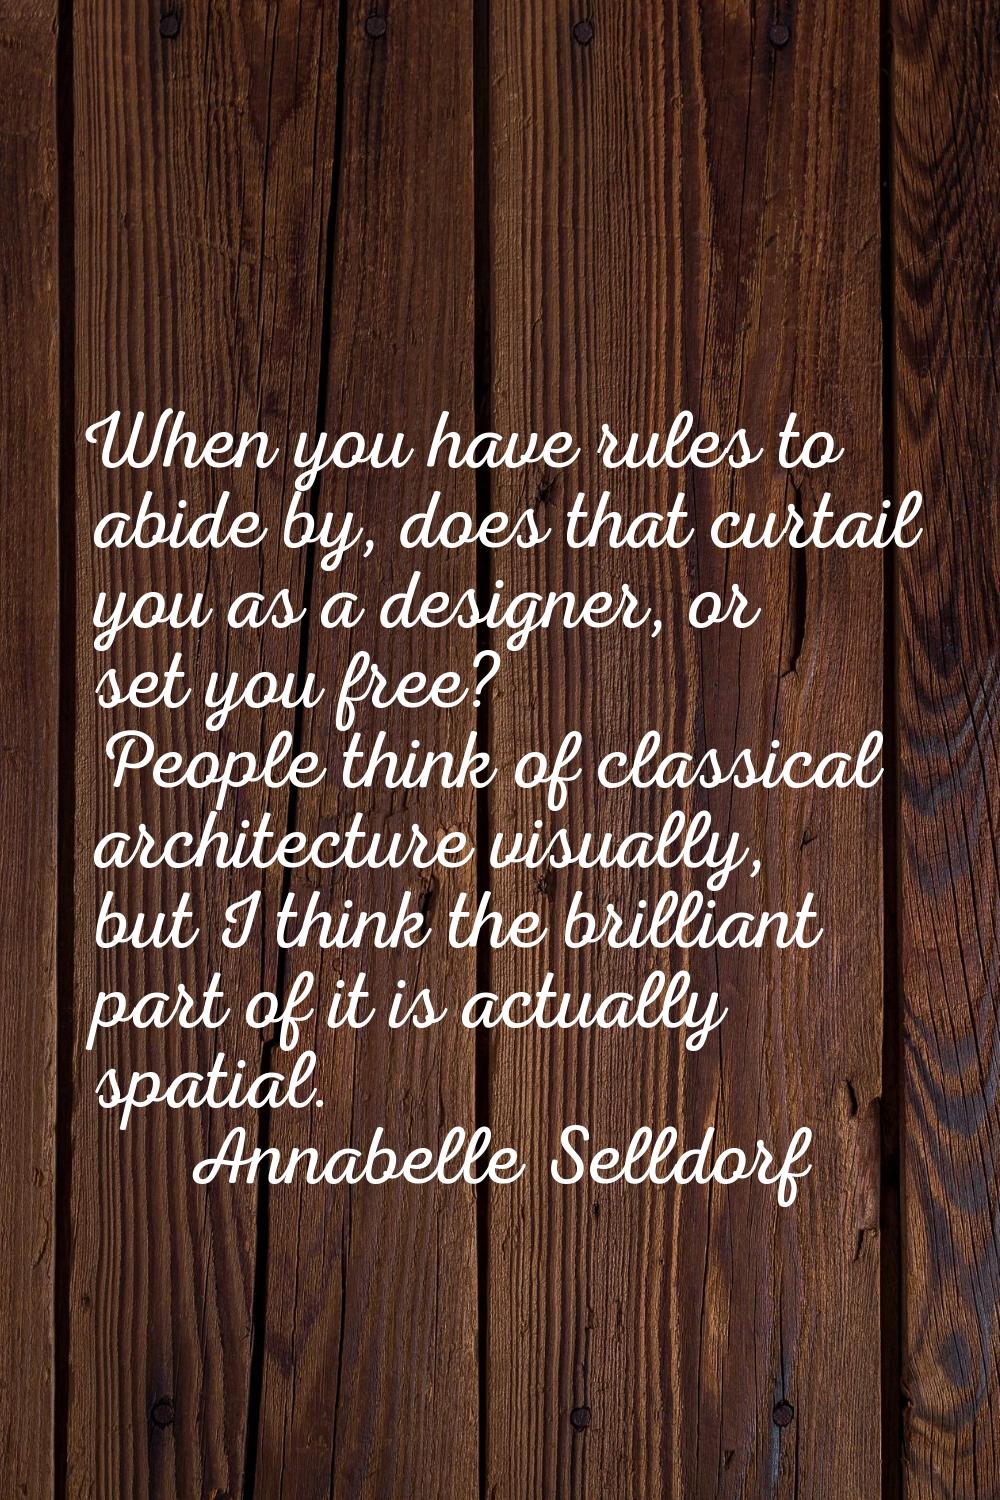 When you have rules to abide by, does that curtail you as a designer, or set you free? People think